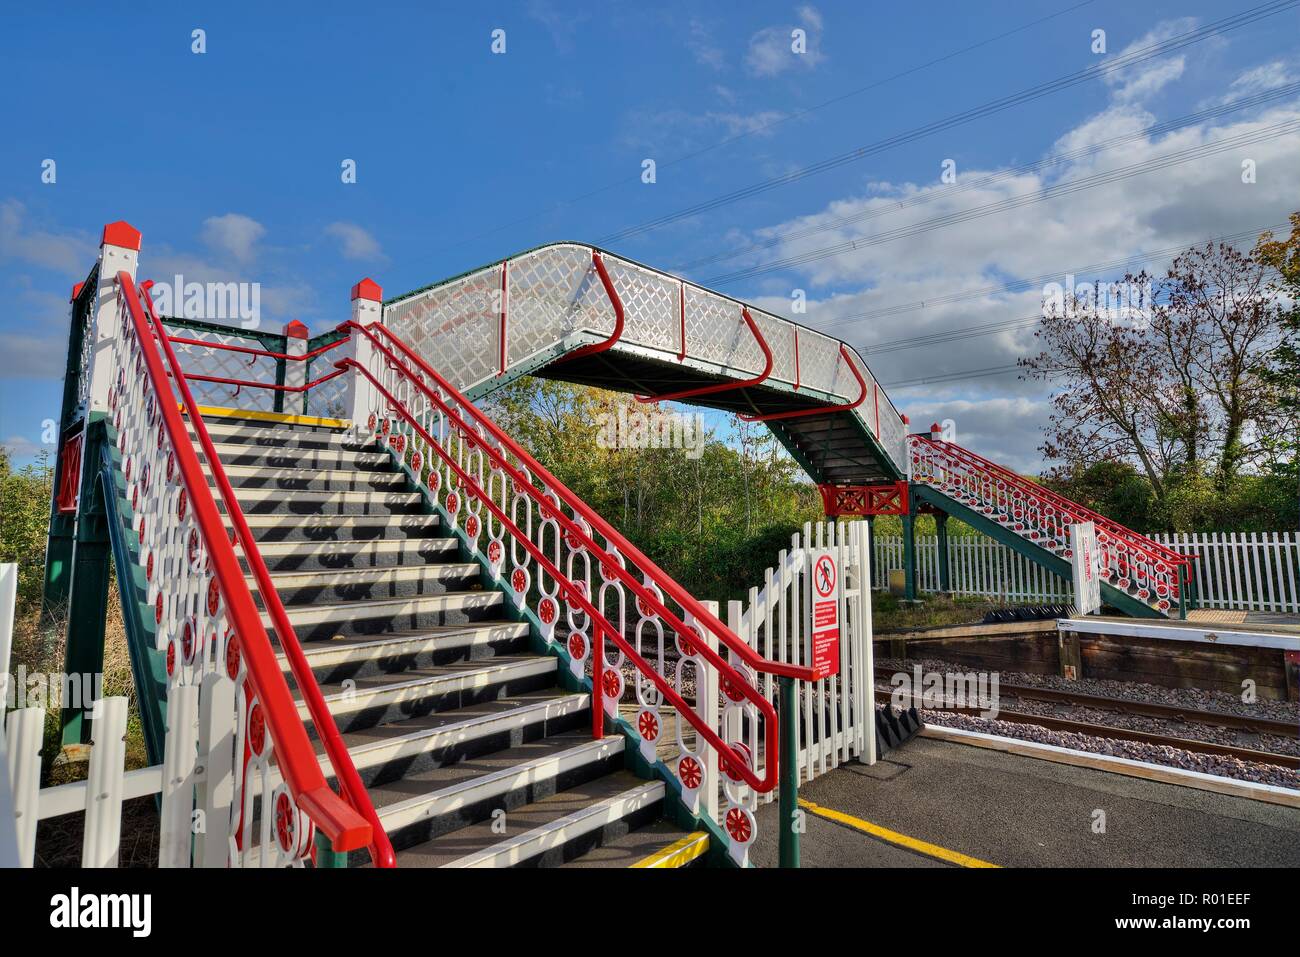 A colourful railway station footbridge at Llanfairpwllgwyngyll, Anglesea in Wales.   Trees are in the background and a blue sky with clouds overhead. Stock Photo